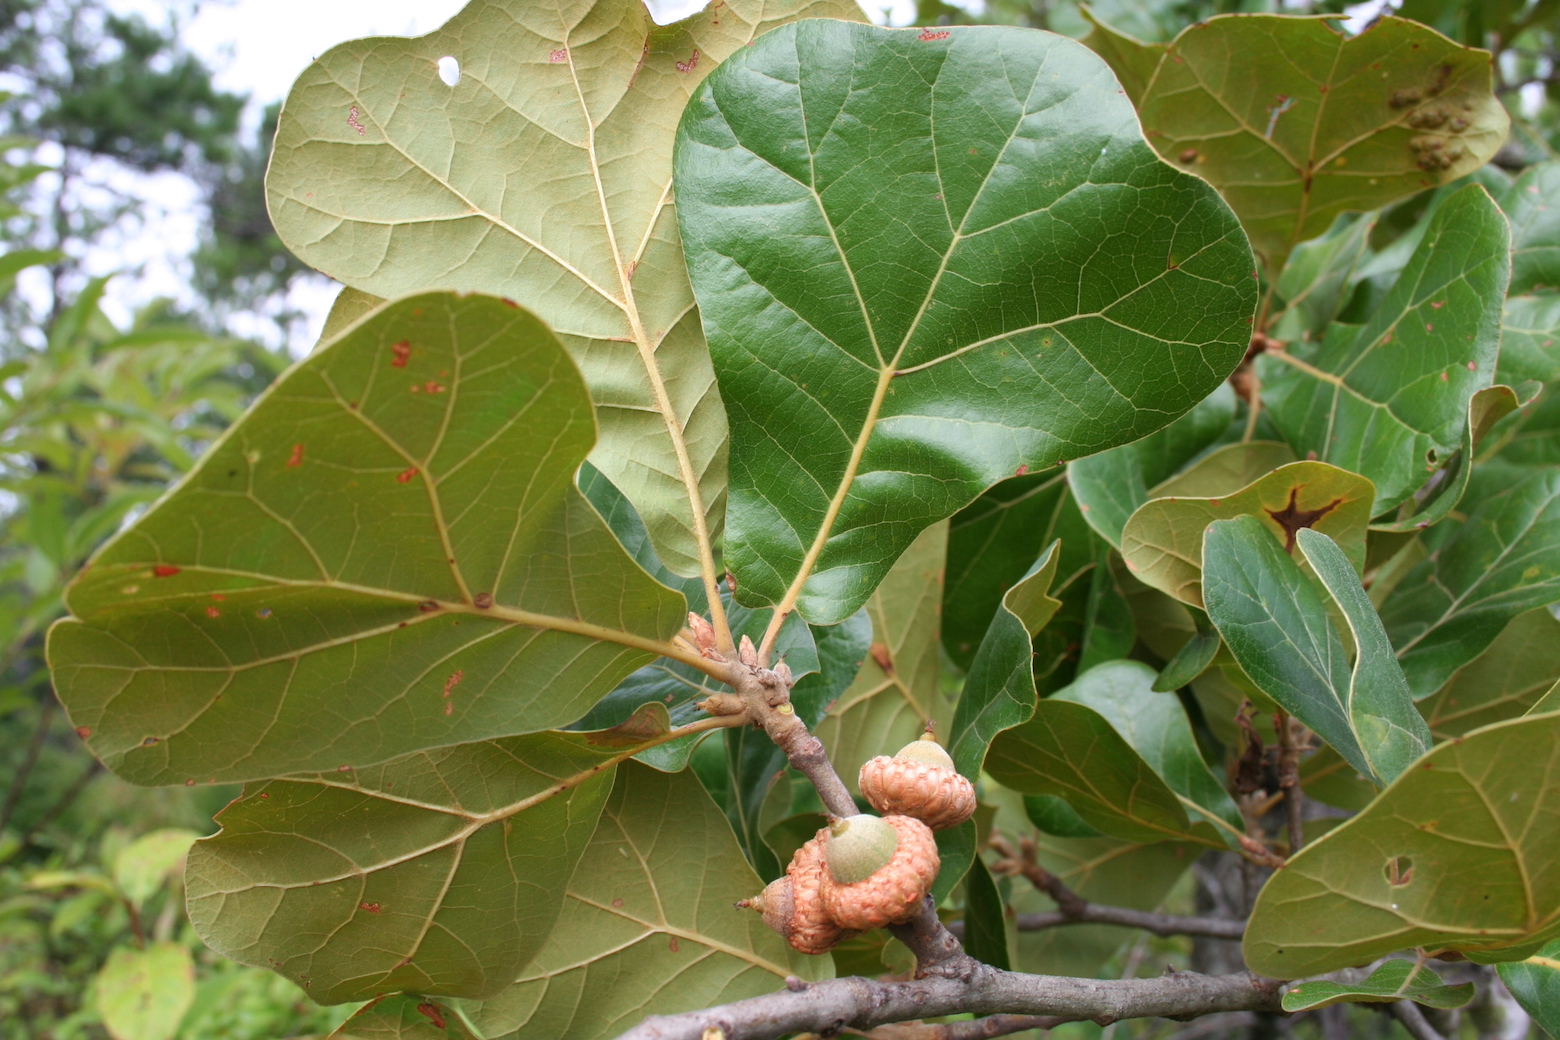 The Scientific Name is Quercus marilandica var. marilandica. You will likely hear them called Blackjack Oak. This picture shows the Blackjack Oak usually is rusty or tawny-colored on the lower leaf surface and has a very thick leaf of Quercus marilandica var. marilandica